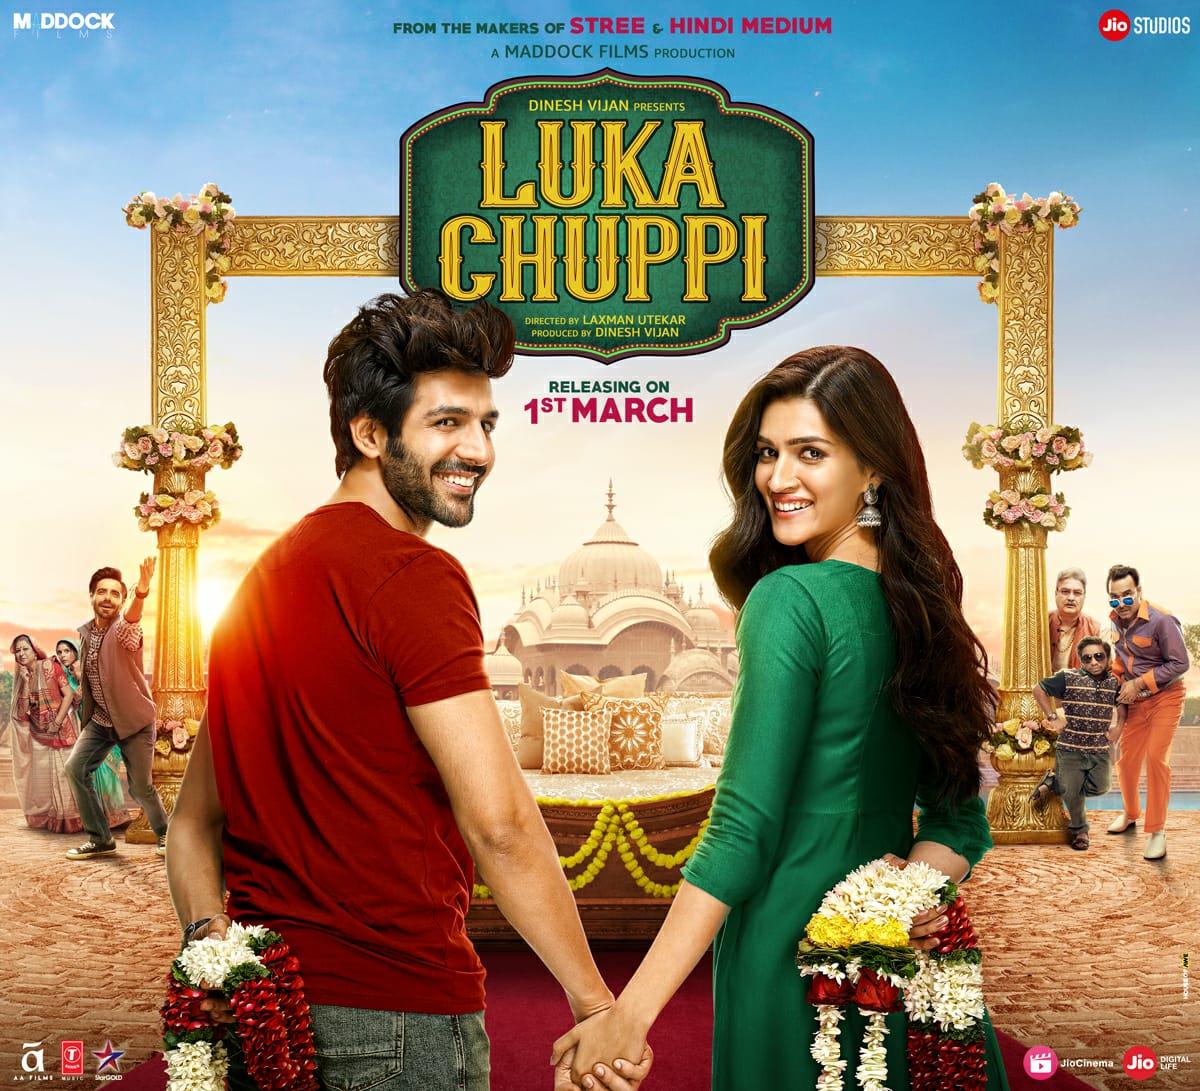 Luka Chuppi Movie HD Poster Wallpaper & First Look Free on Coming